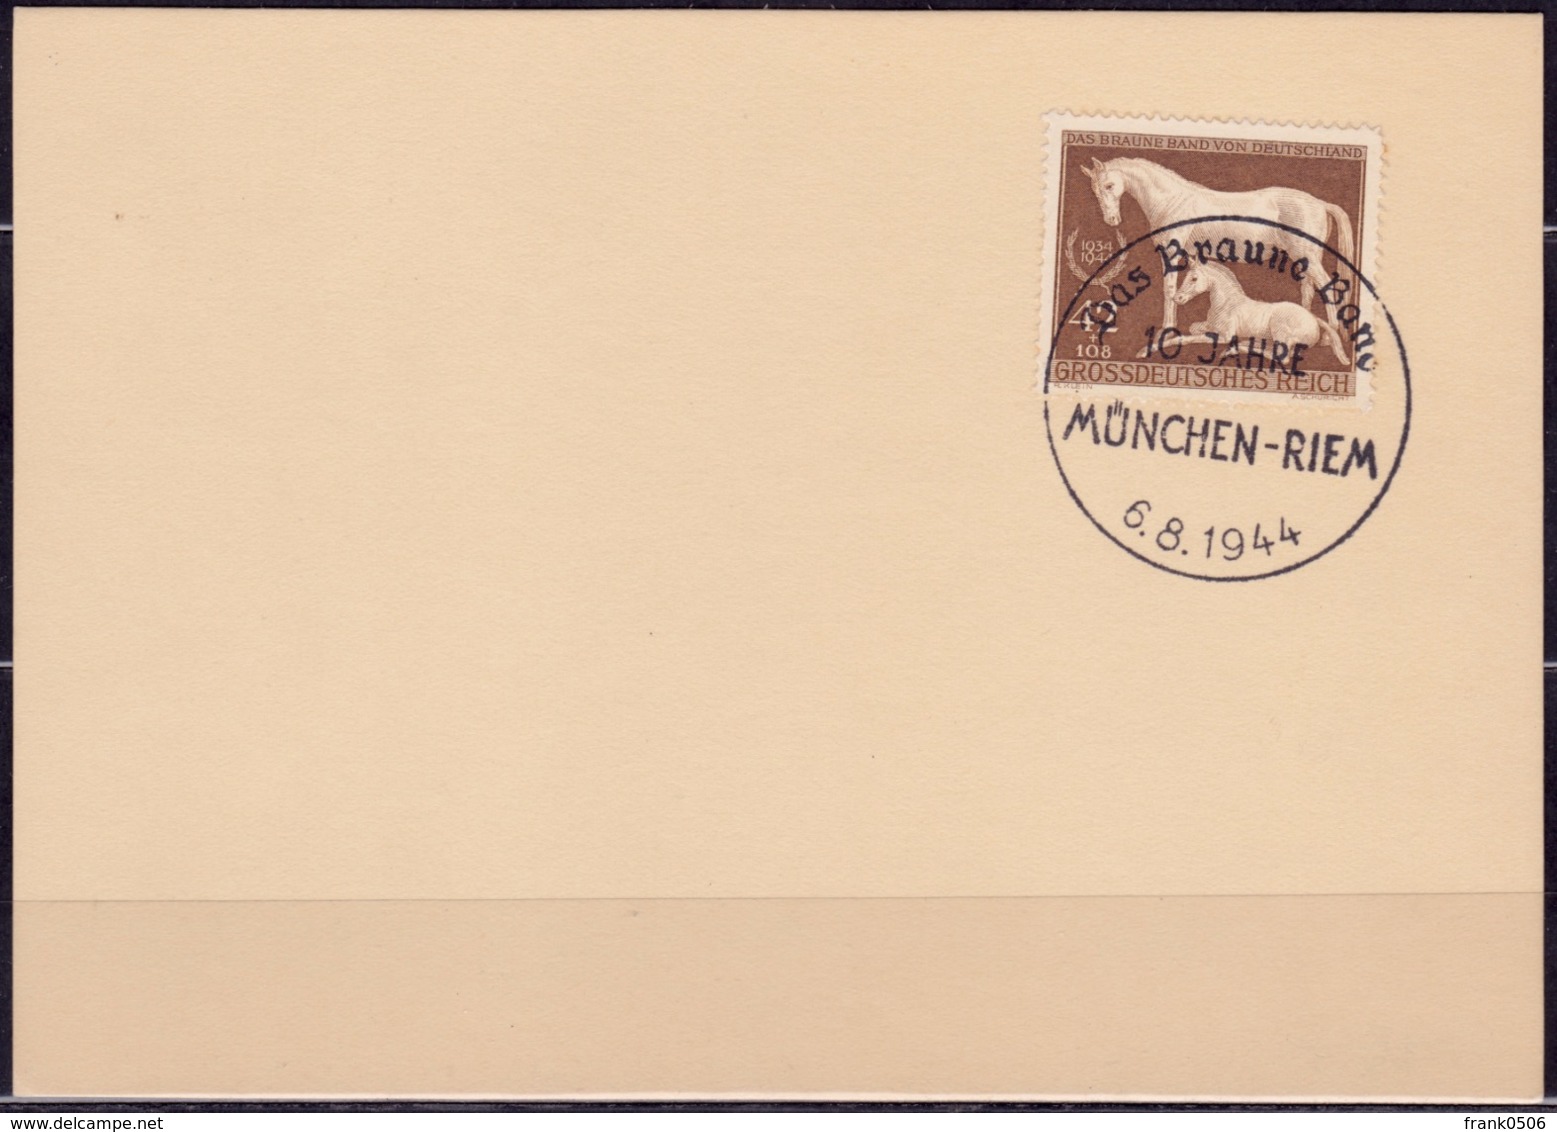 Germany, 1944, Race Horse And Foal, 11th Brown Ribbon At Munich, Sc#B283, Used - Used Stamps